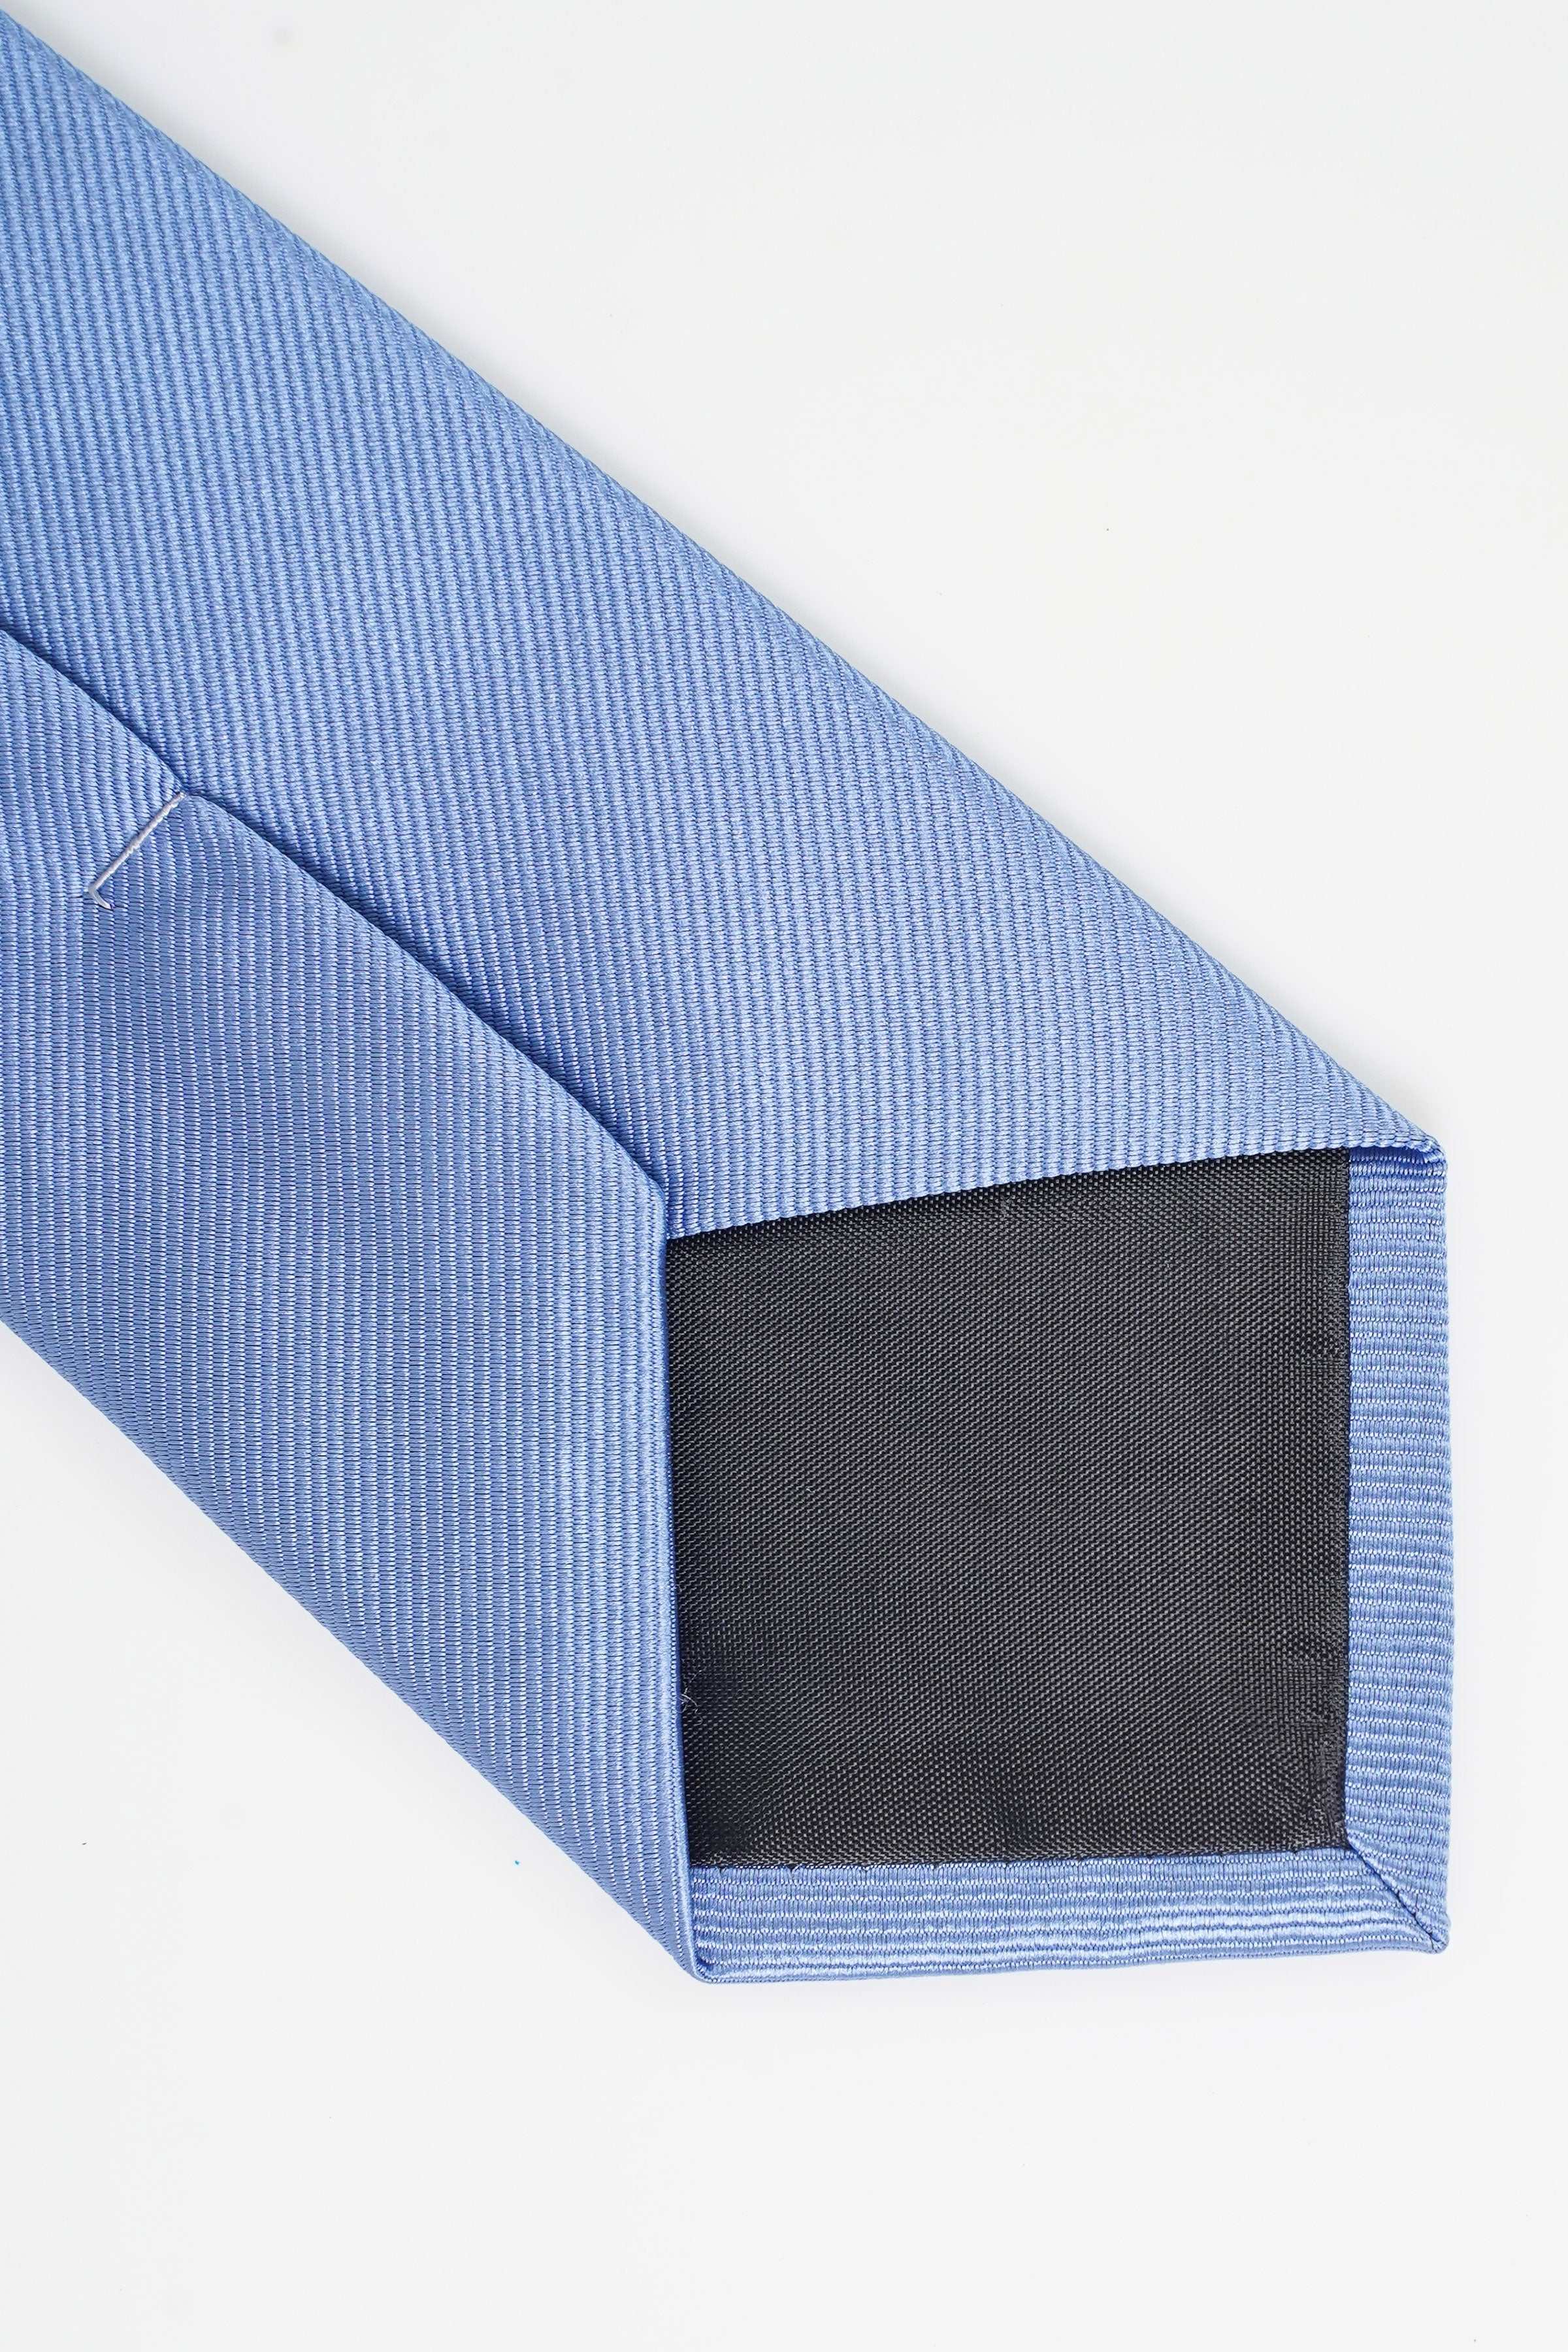 POLY SILK TIE at Charcoal Clothing